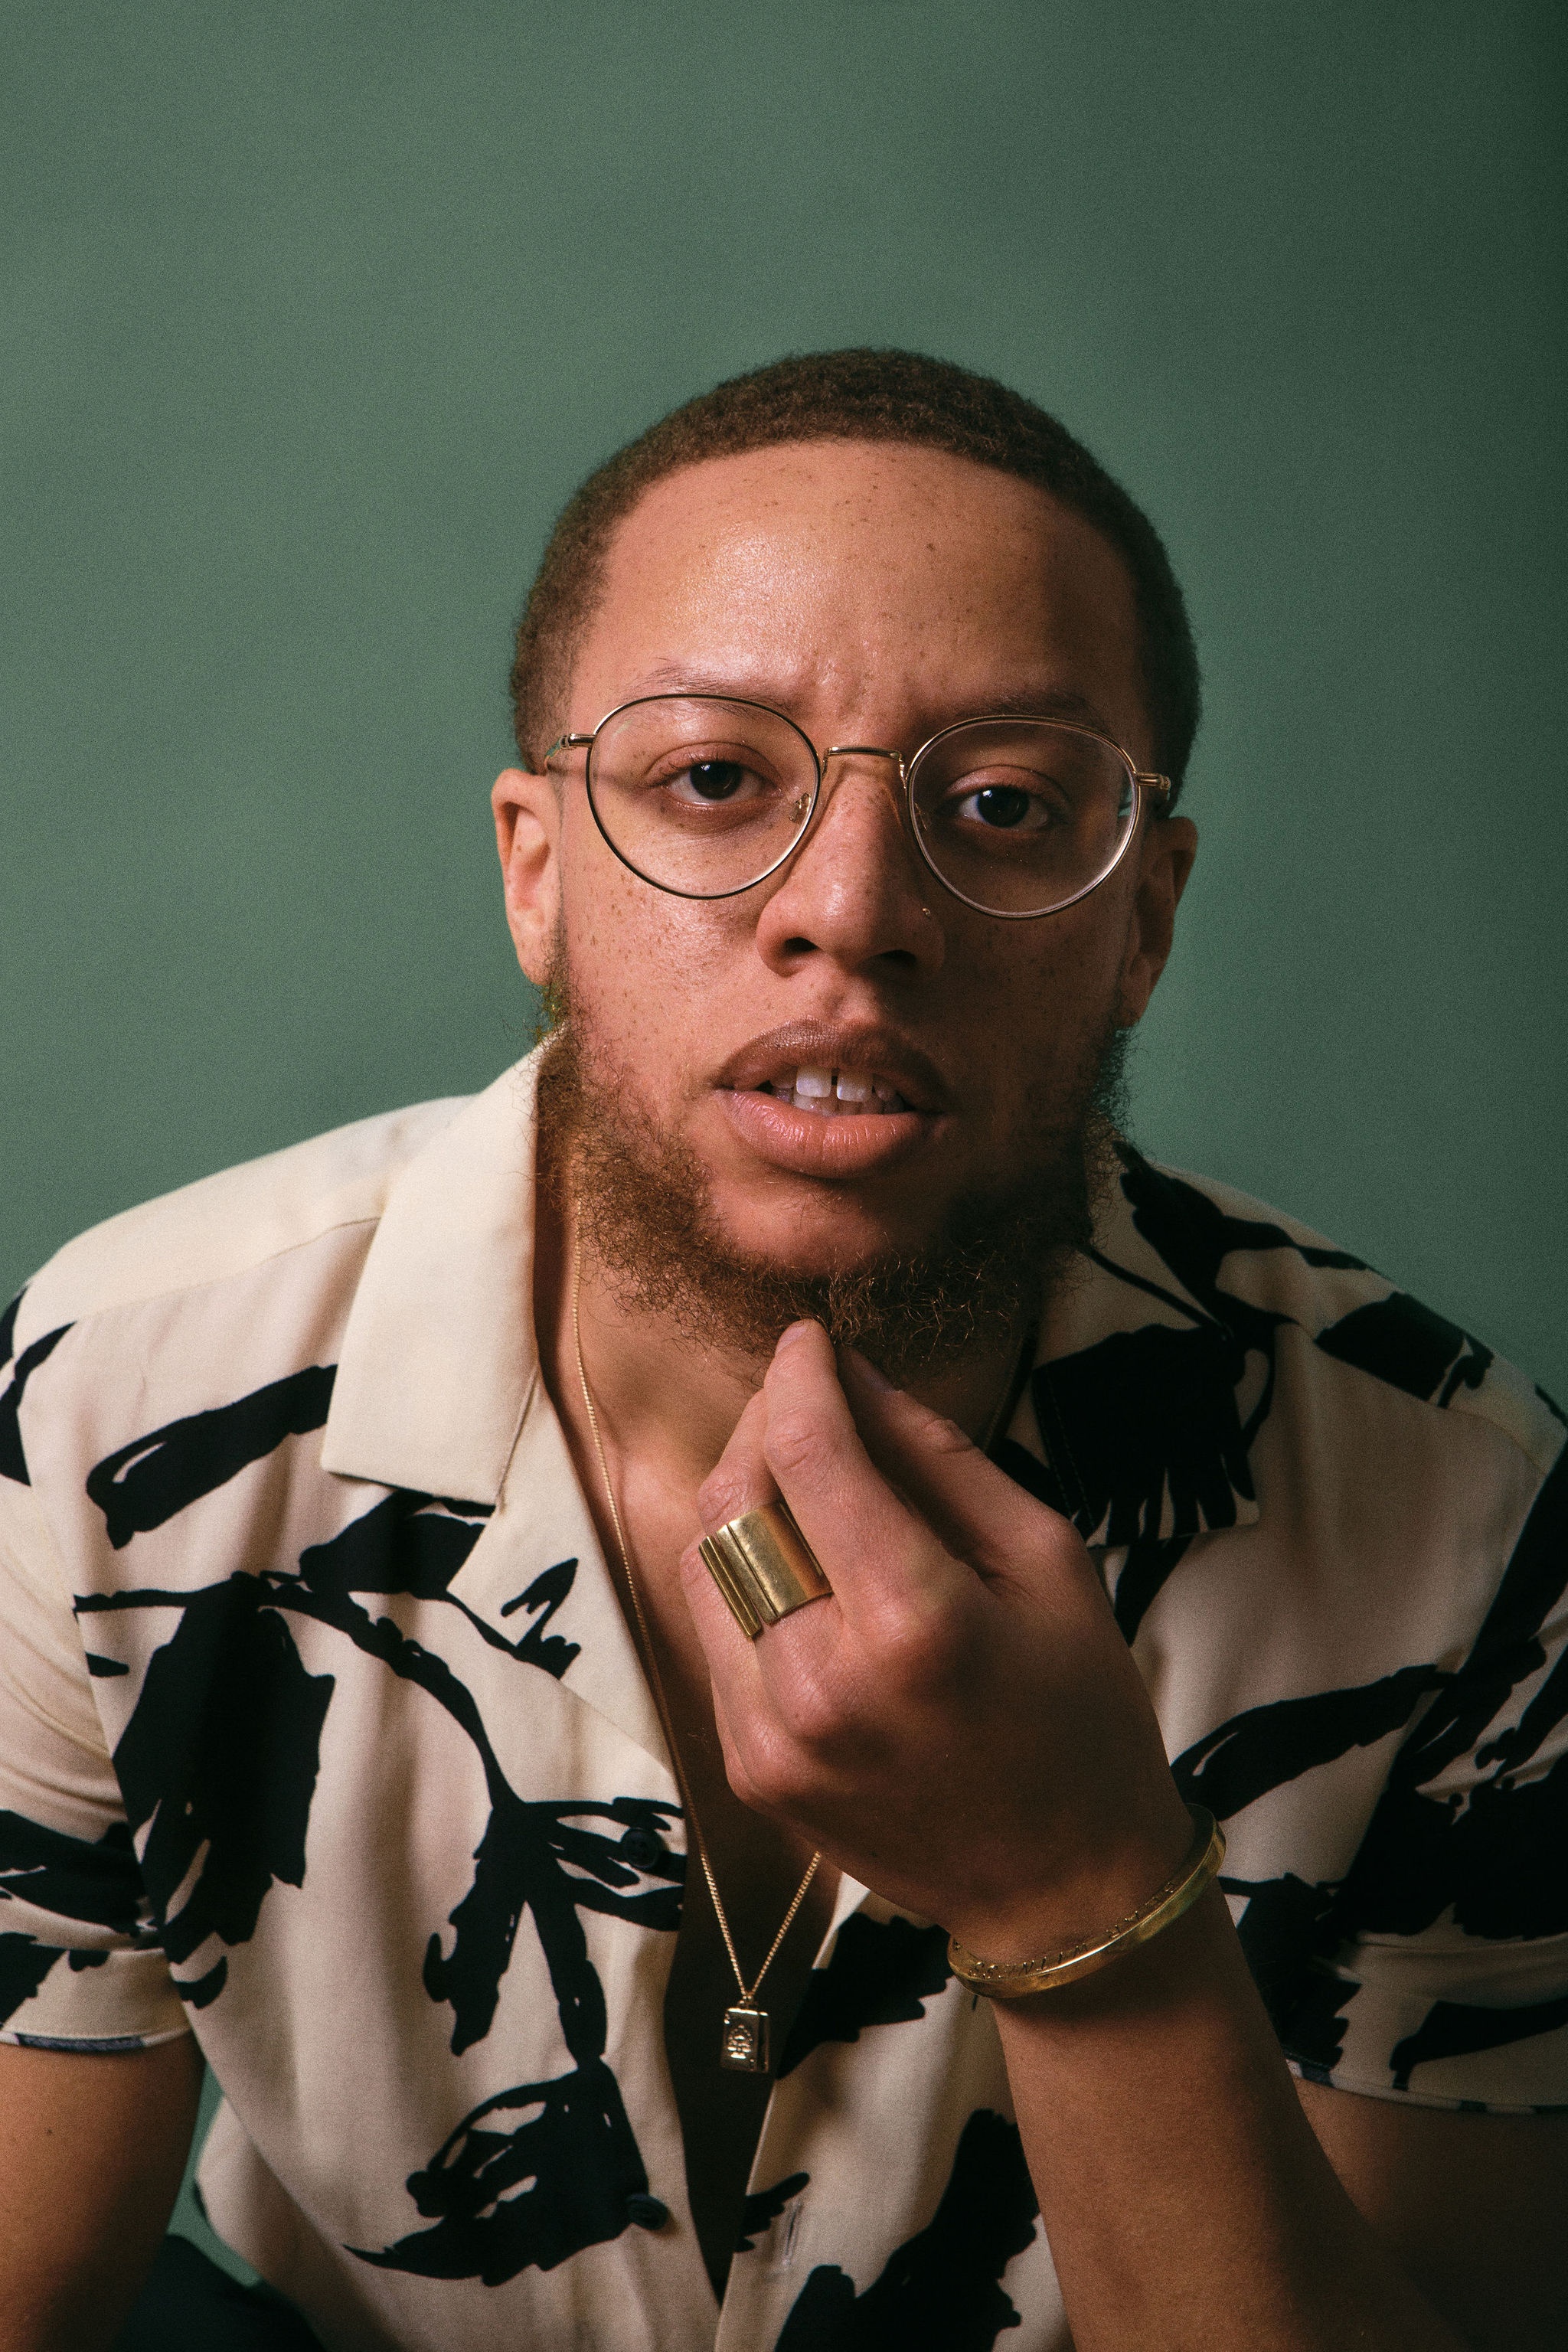 A portrait of Najee Omar, a queer Black person who poses in front of a khaki green backdrop. He leans forward with one hand to his chin. He has light brown skin, a slightly bushy light brown beard and wears glasses. Photo by Christian Hicks